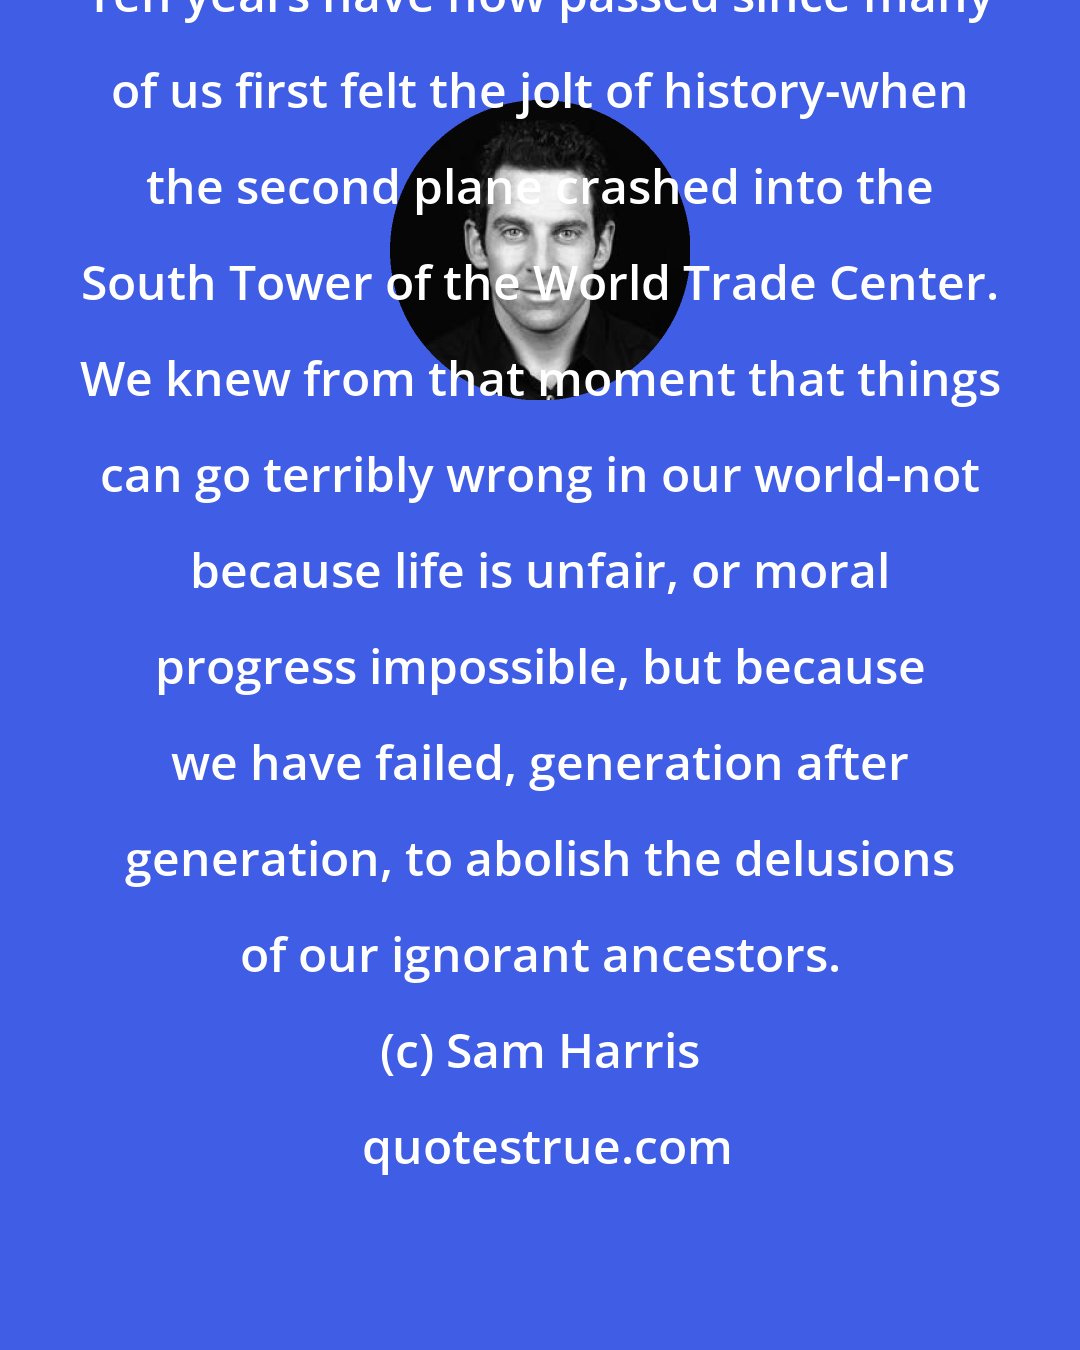 Sam Harris: Ten years have now passed since many of us first felt the jolt of history-when the second plane crashed into the South Tower of the World Trade Center. We knew from that moment that things can go terribly wrong in our world-not because life is unfair, or moral progress impossible, but because we have failed, generation after generation, to abolish the delusions of our ignorant ancestors.